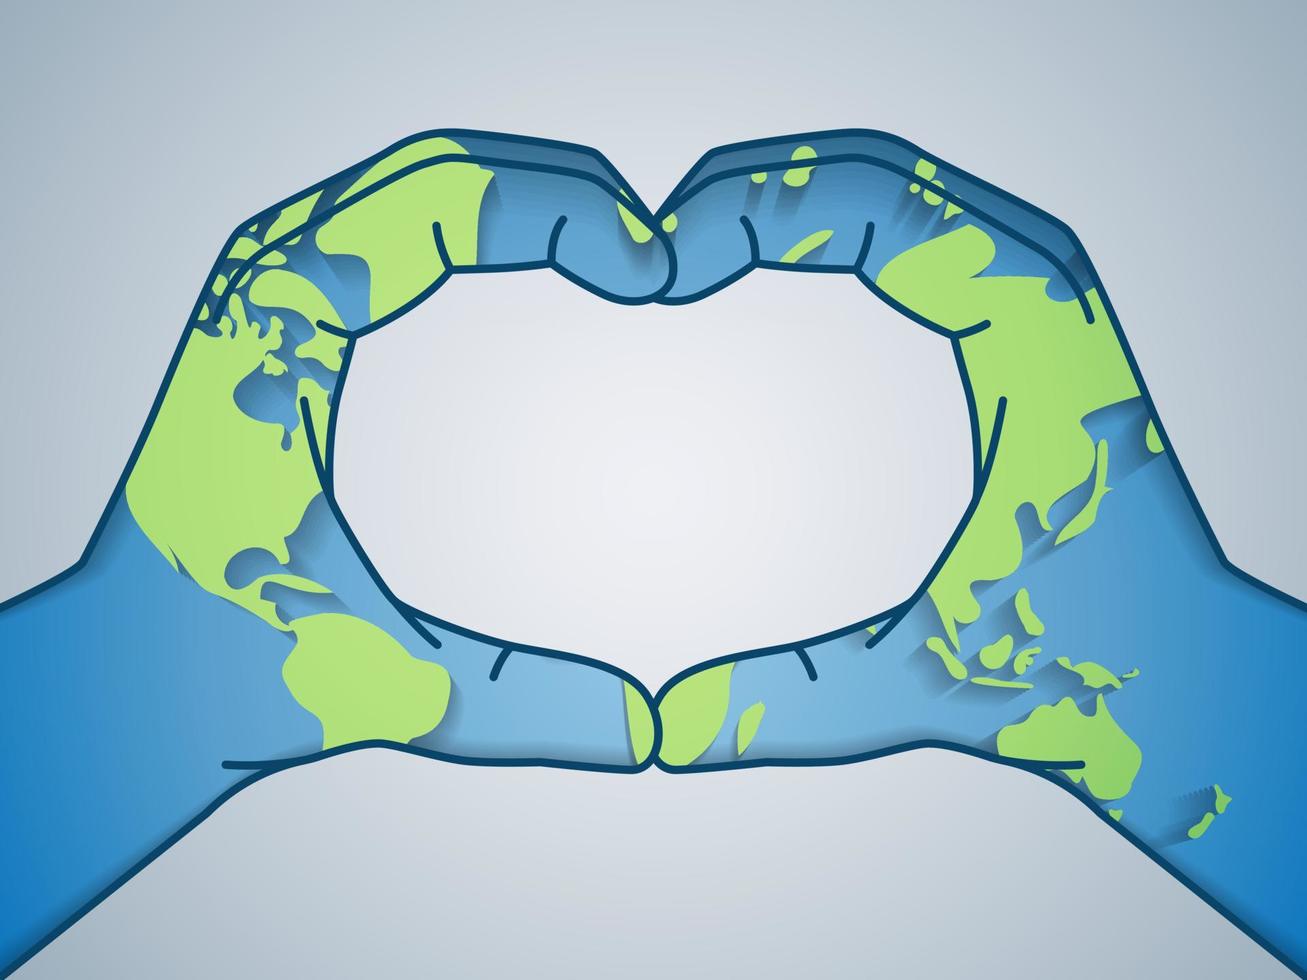 Hands In The World Map Forming Heart Shape for international peace world day vector